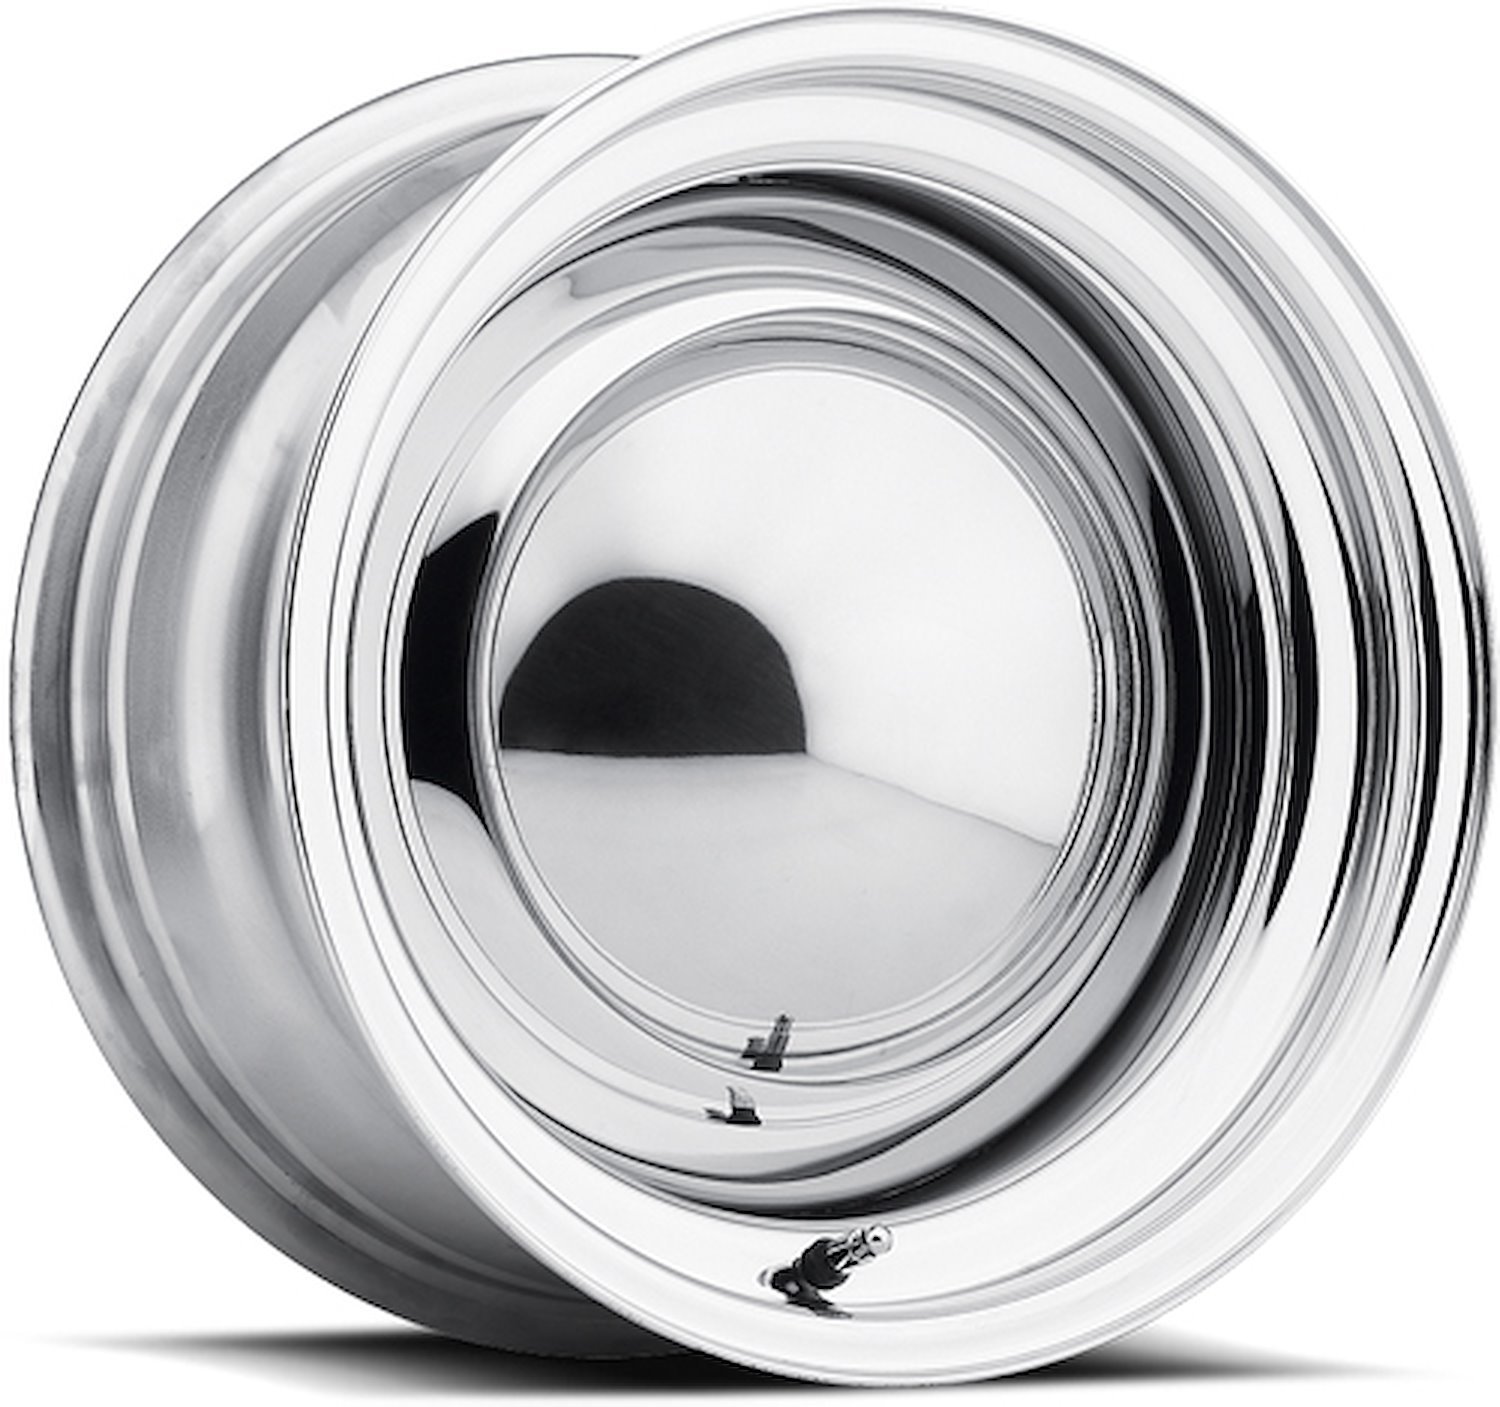 Solid Wheel Chrome 15X10 5X45 5X475 Bolt Circle 5 Back Spacing 13 offset 319 Center Bore 1500 lbs Load Rating